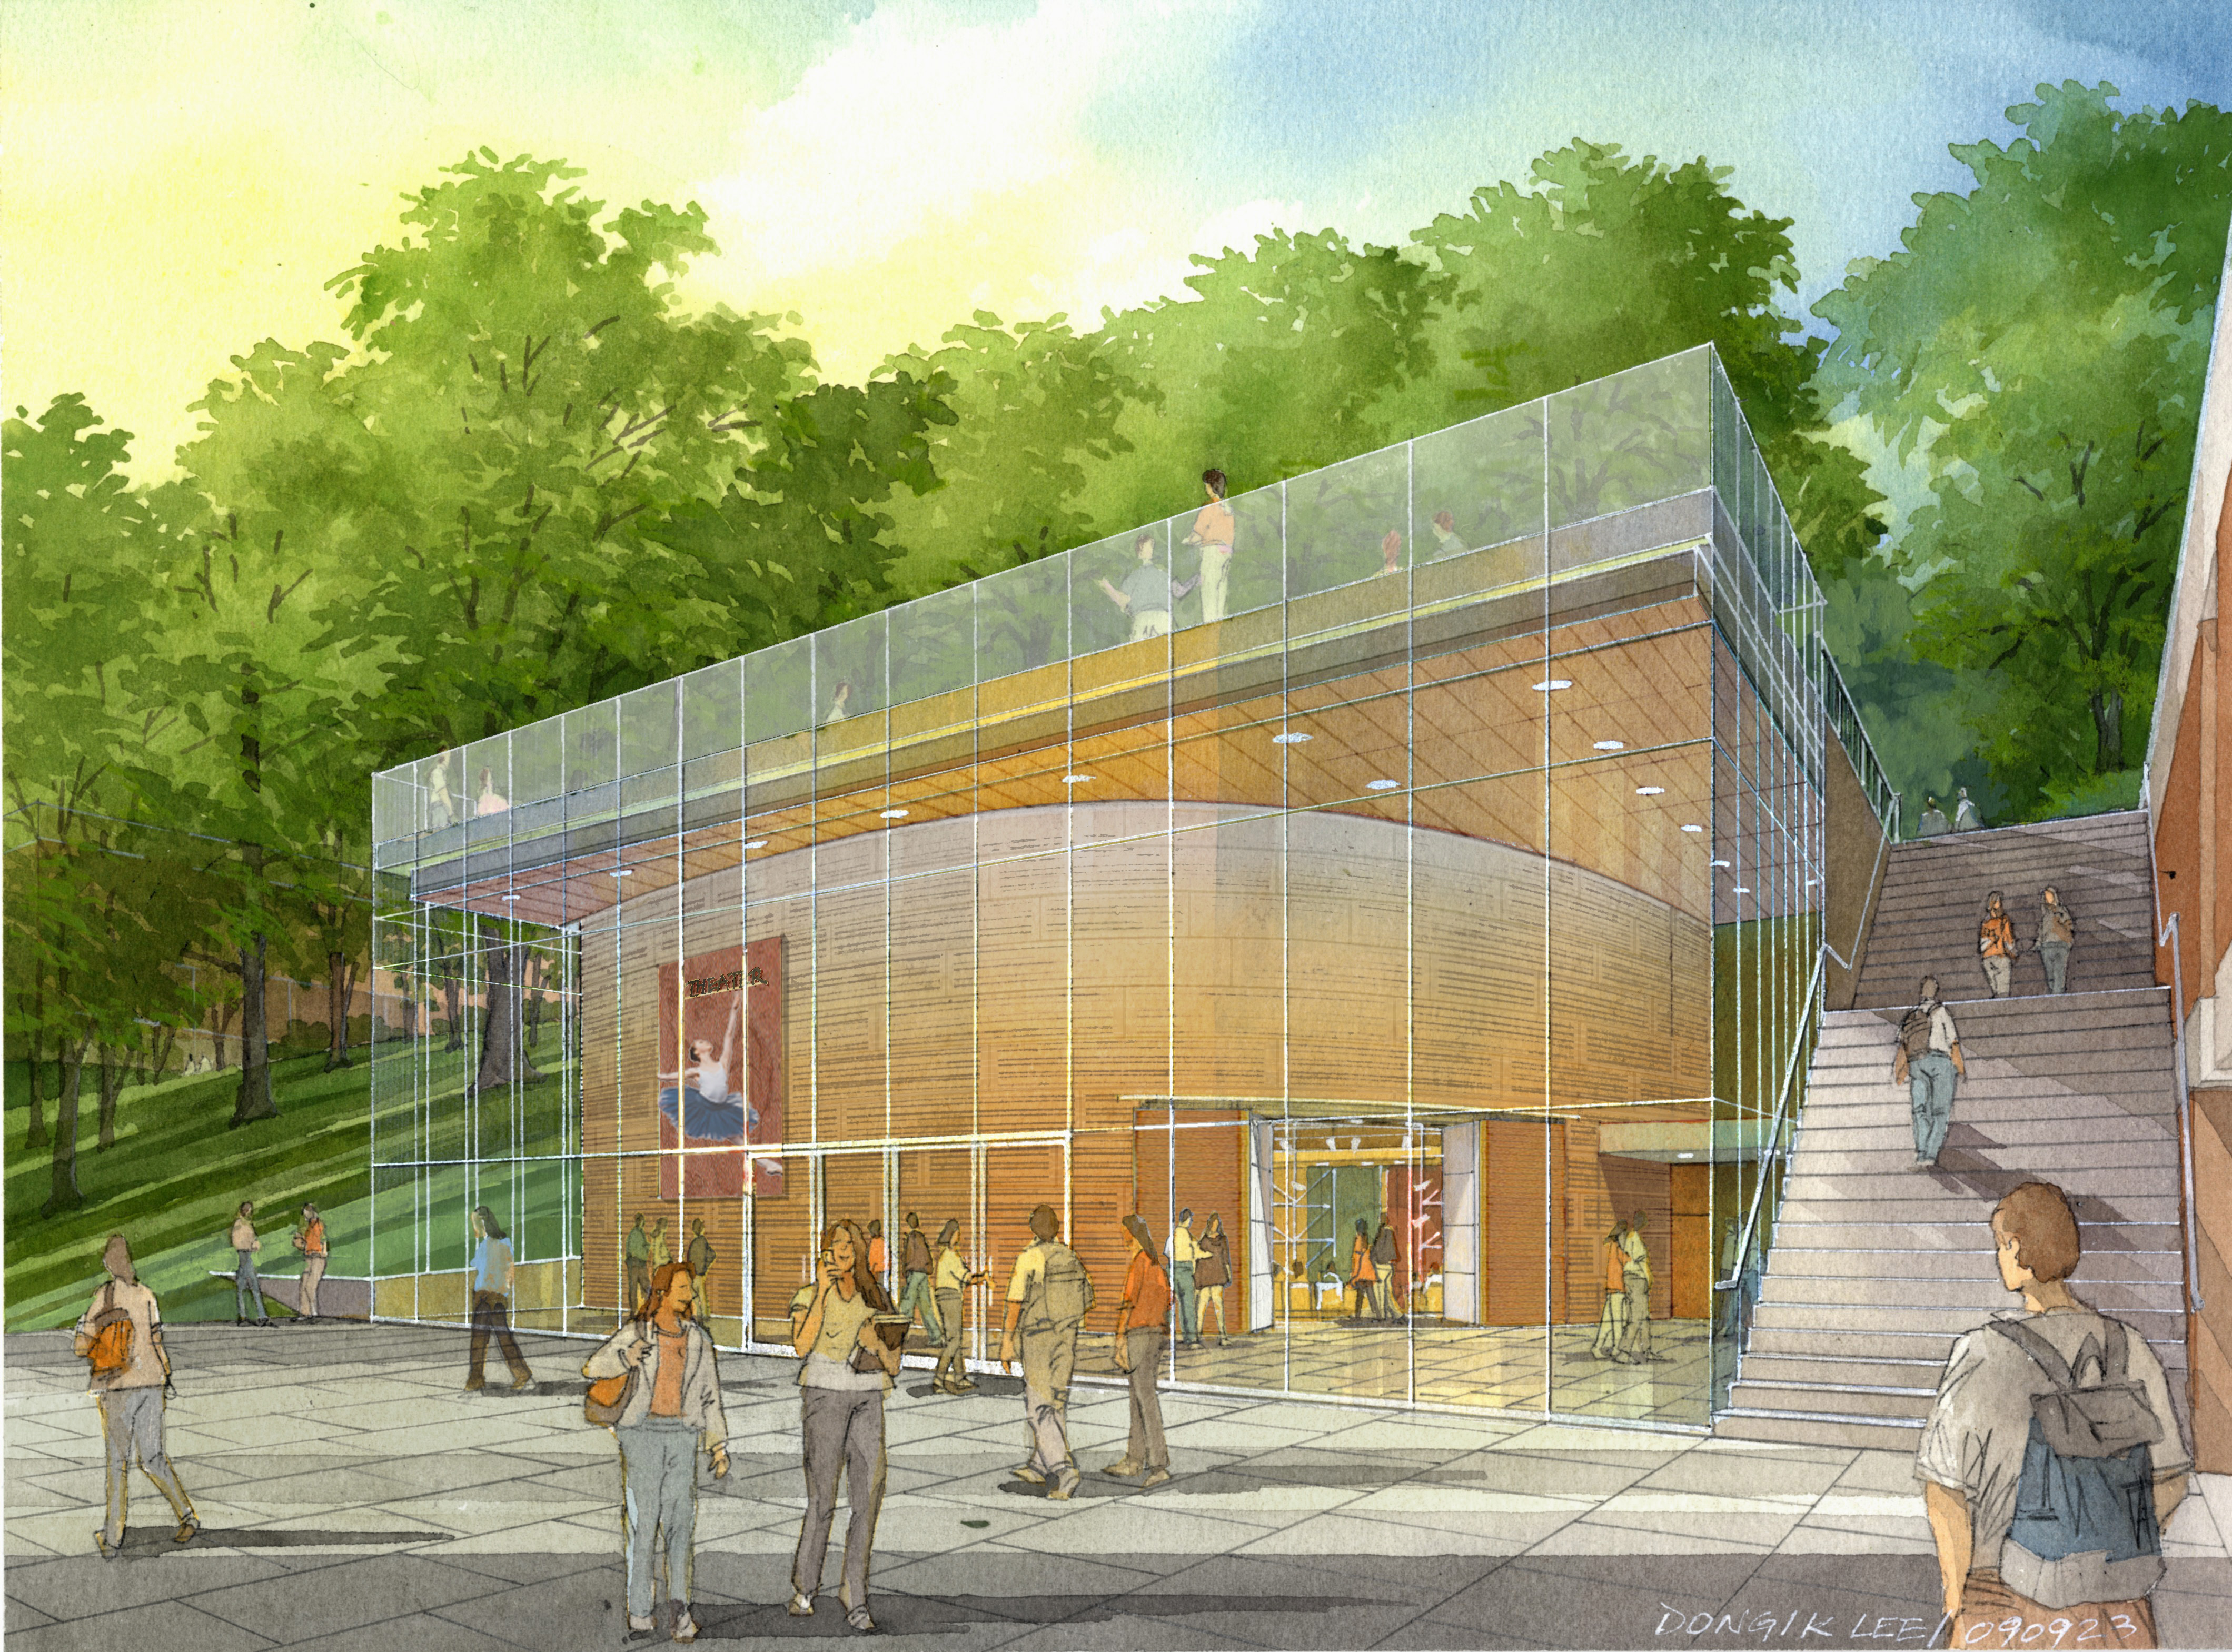 Digital rendering of a glass building with  people walking inside, outside, and on its roof